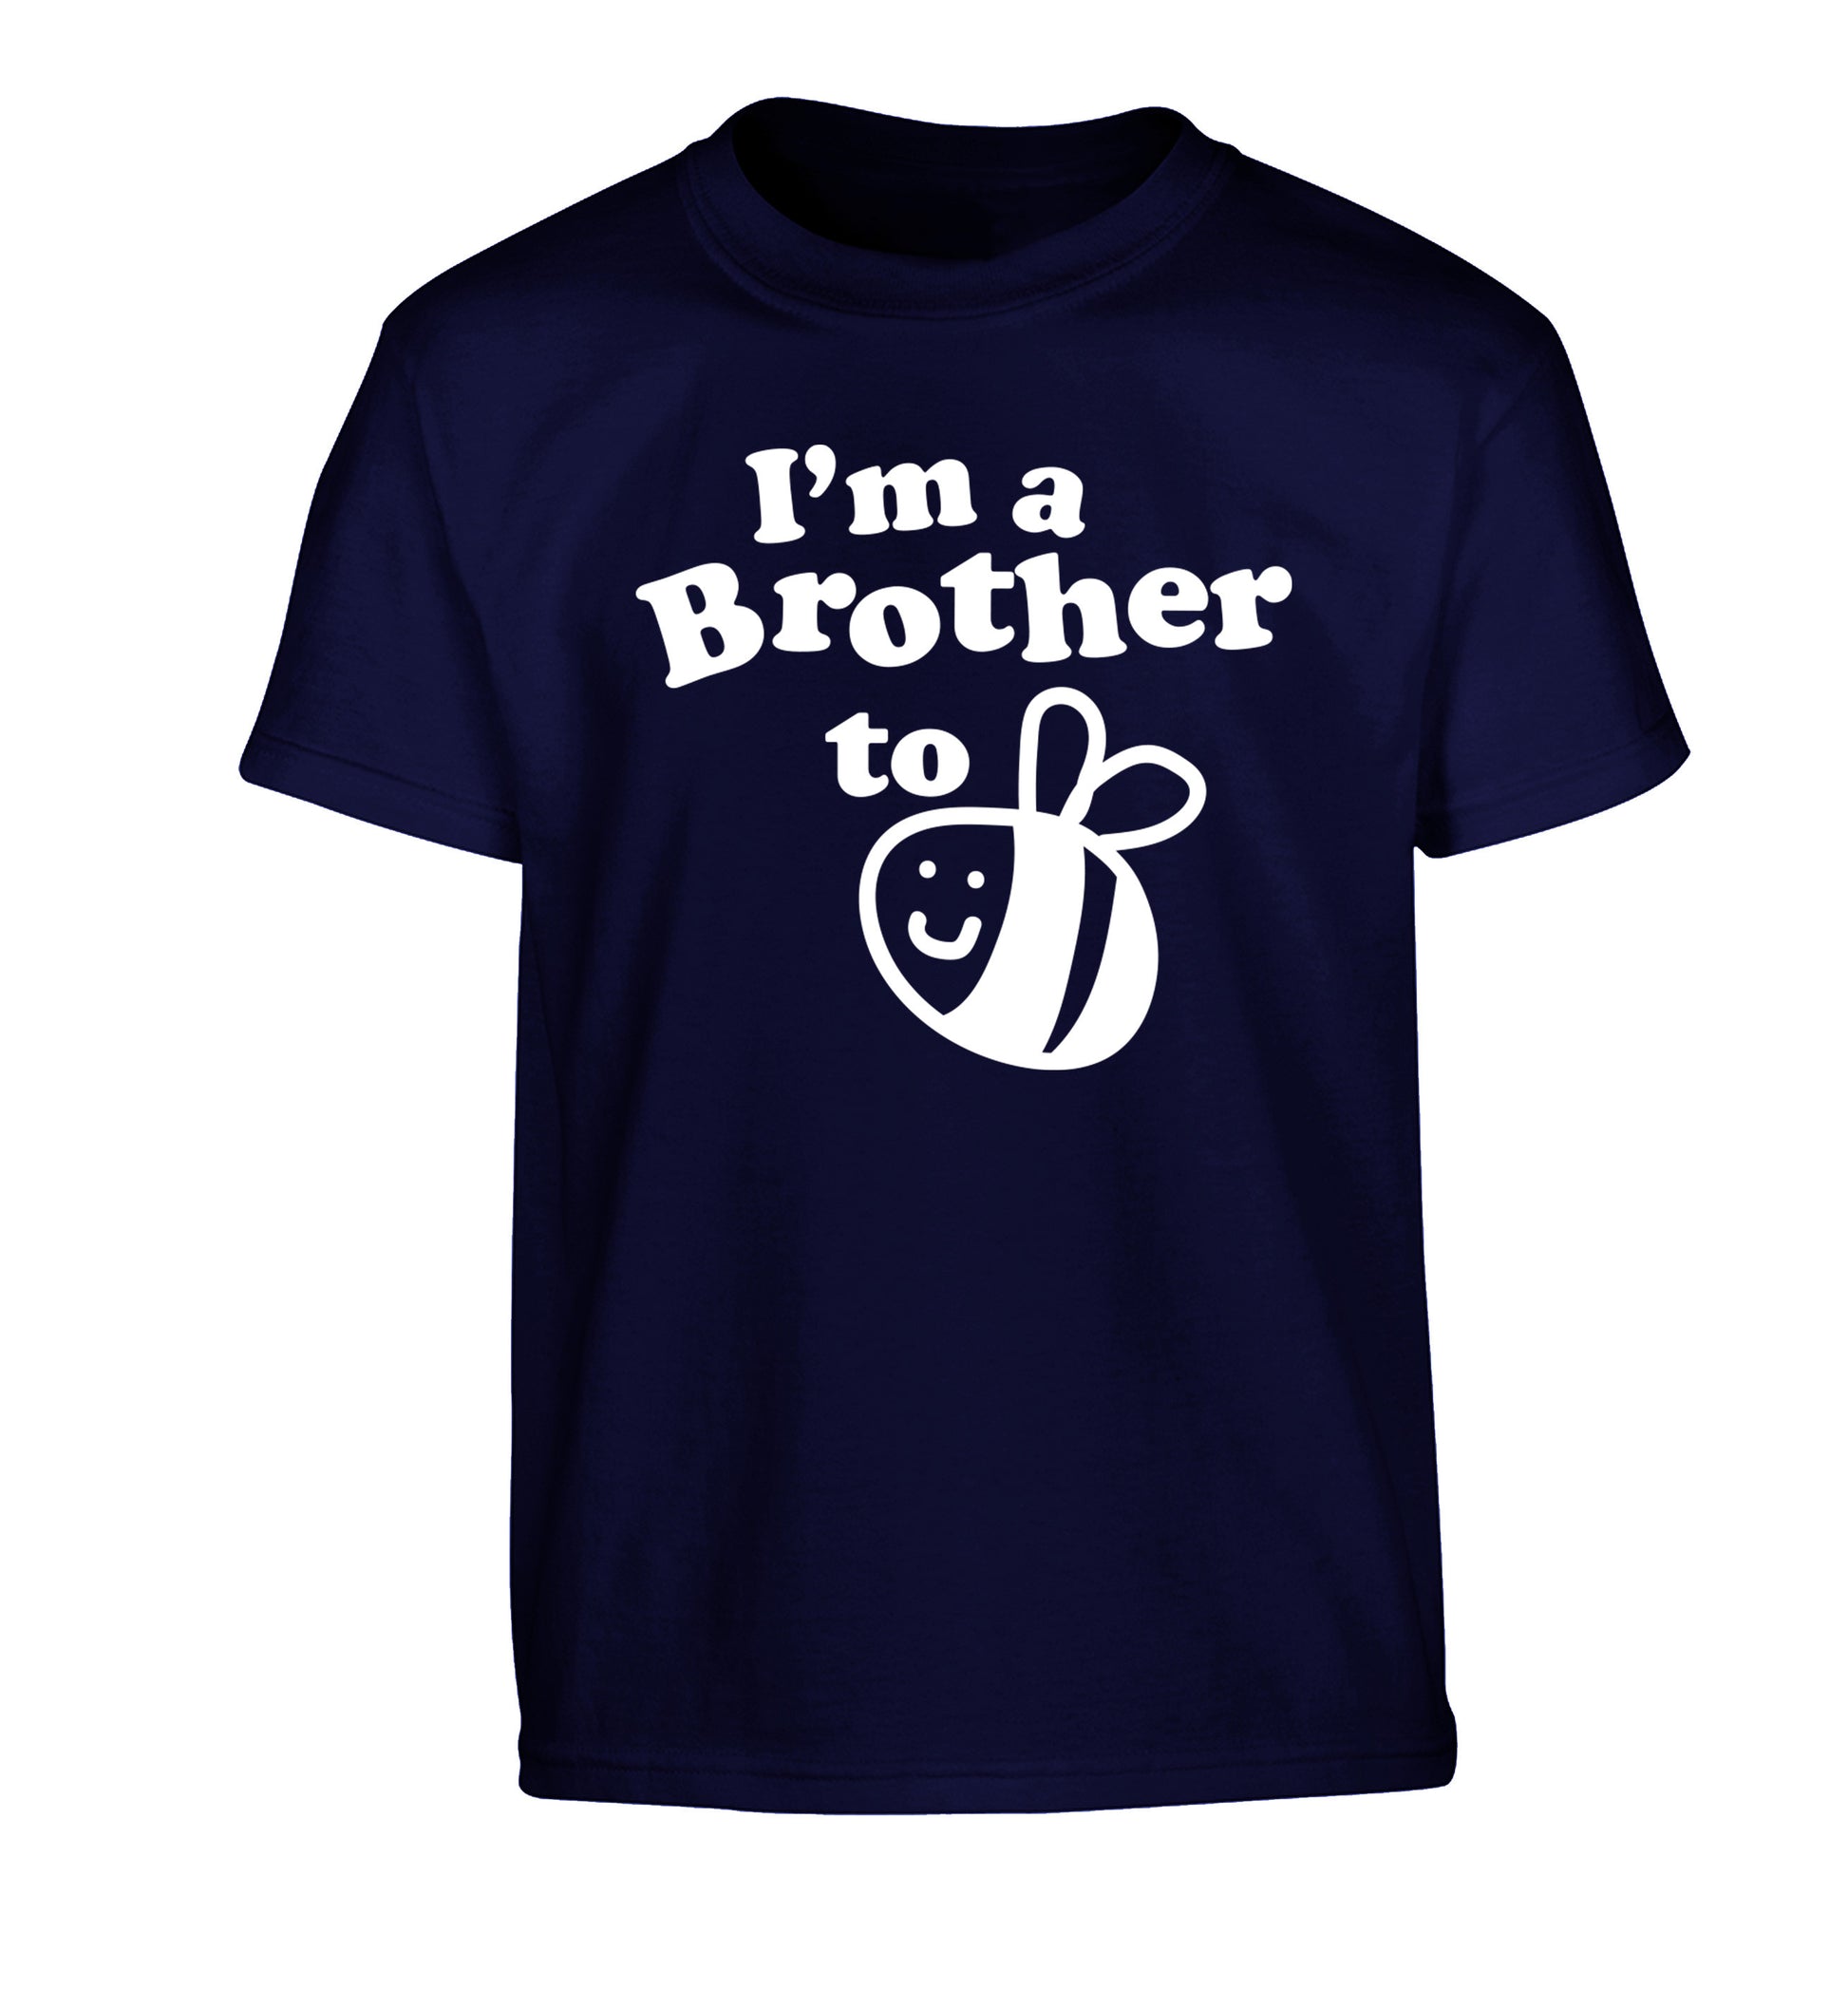 I'm a brother to be Children's navy Tshirt 12-14 Years